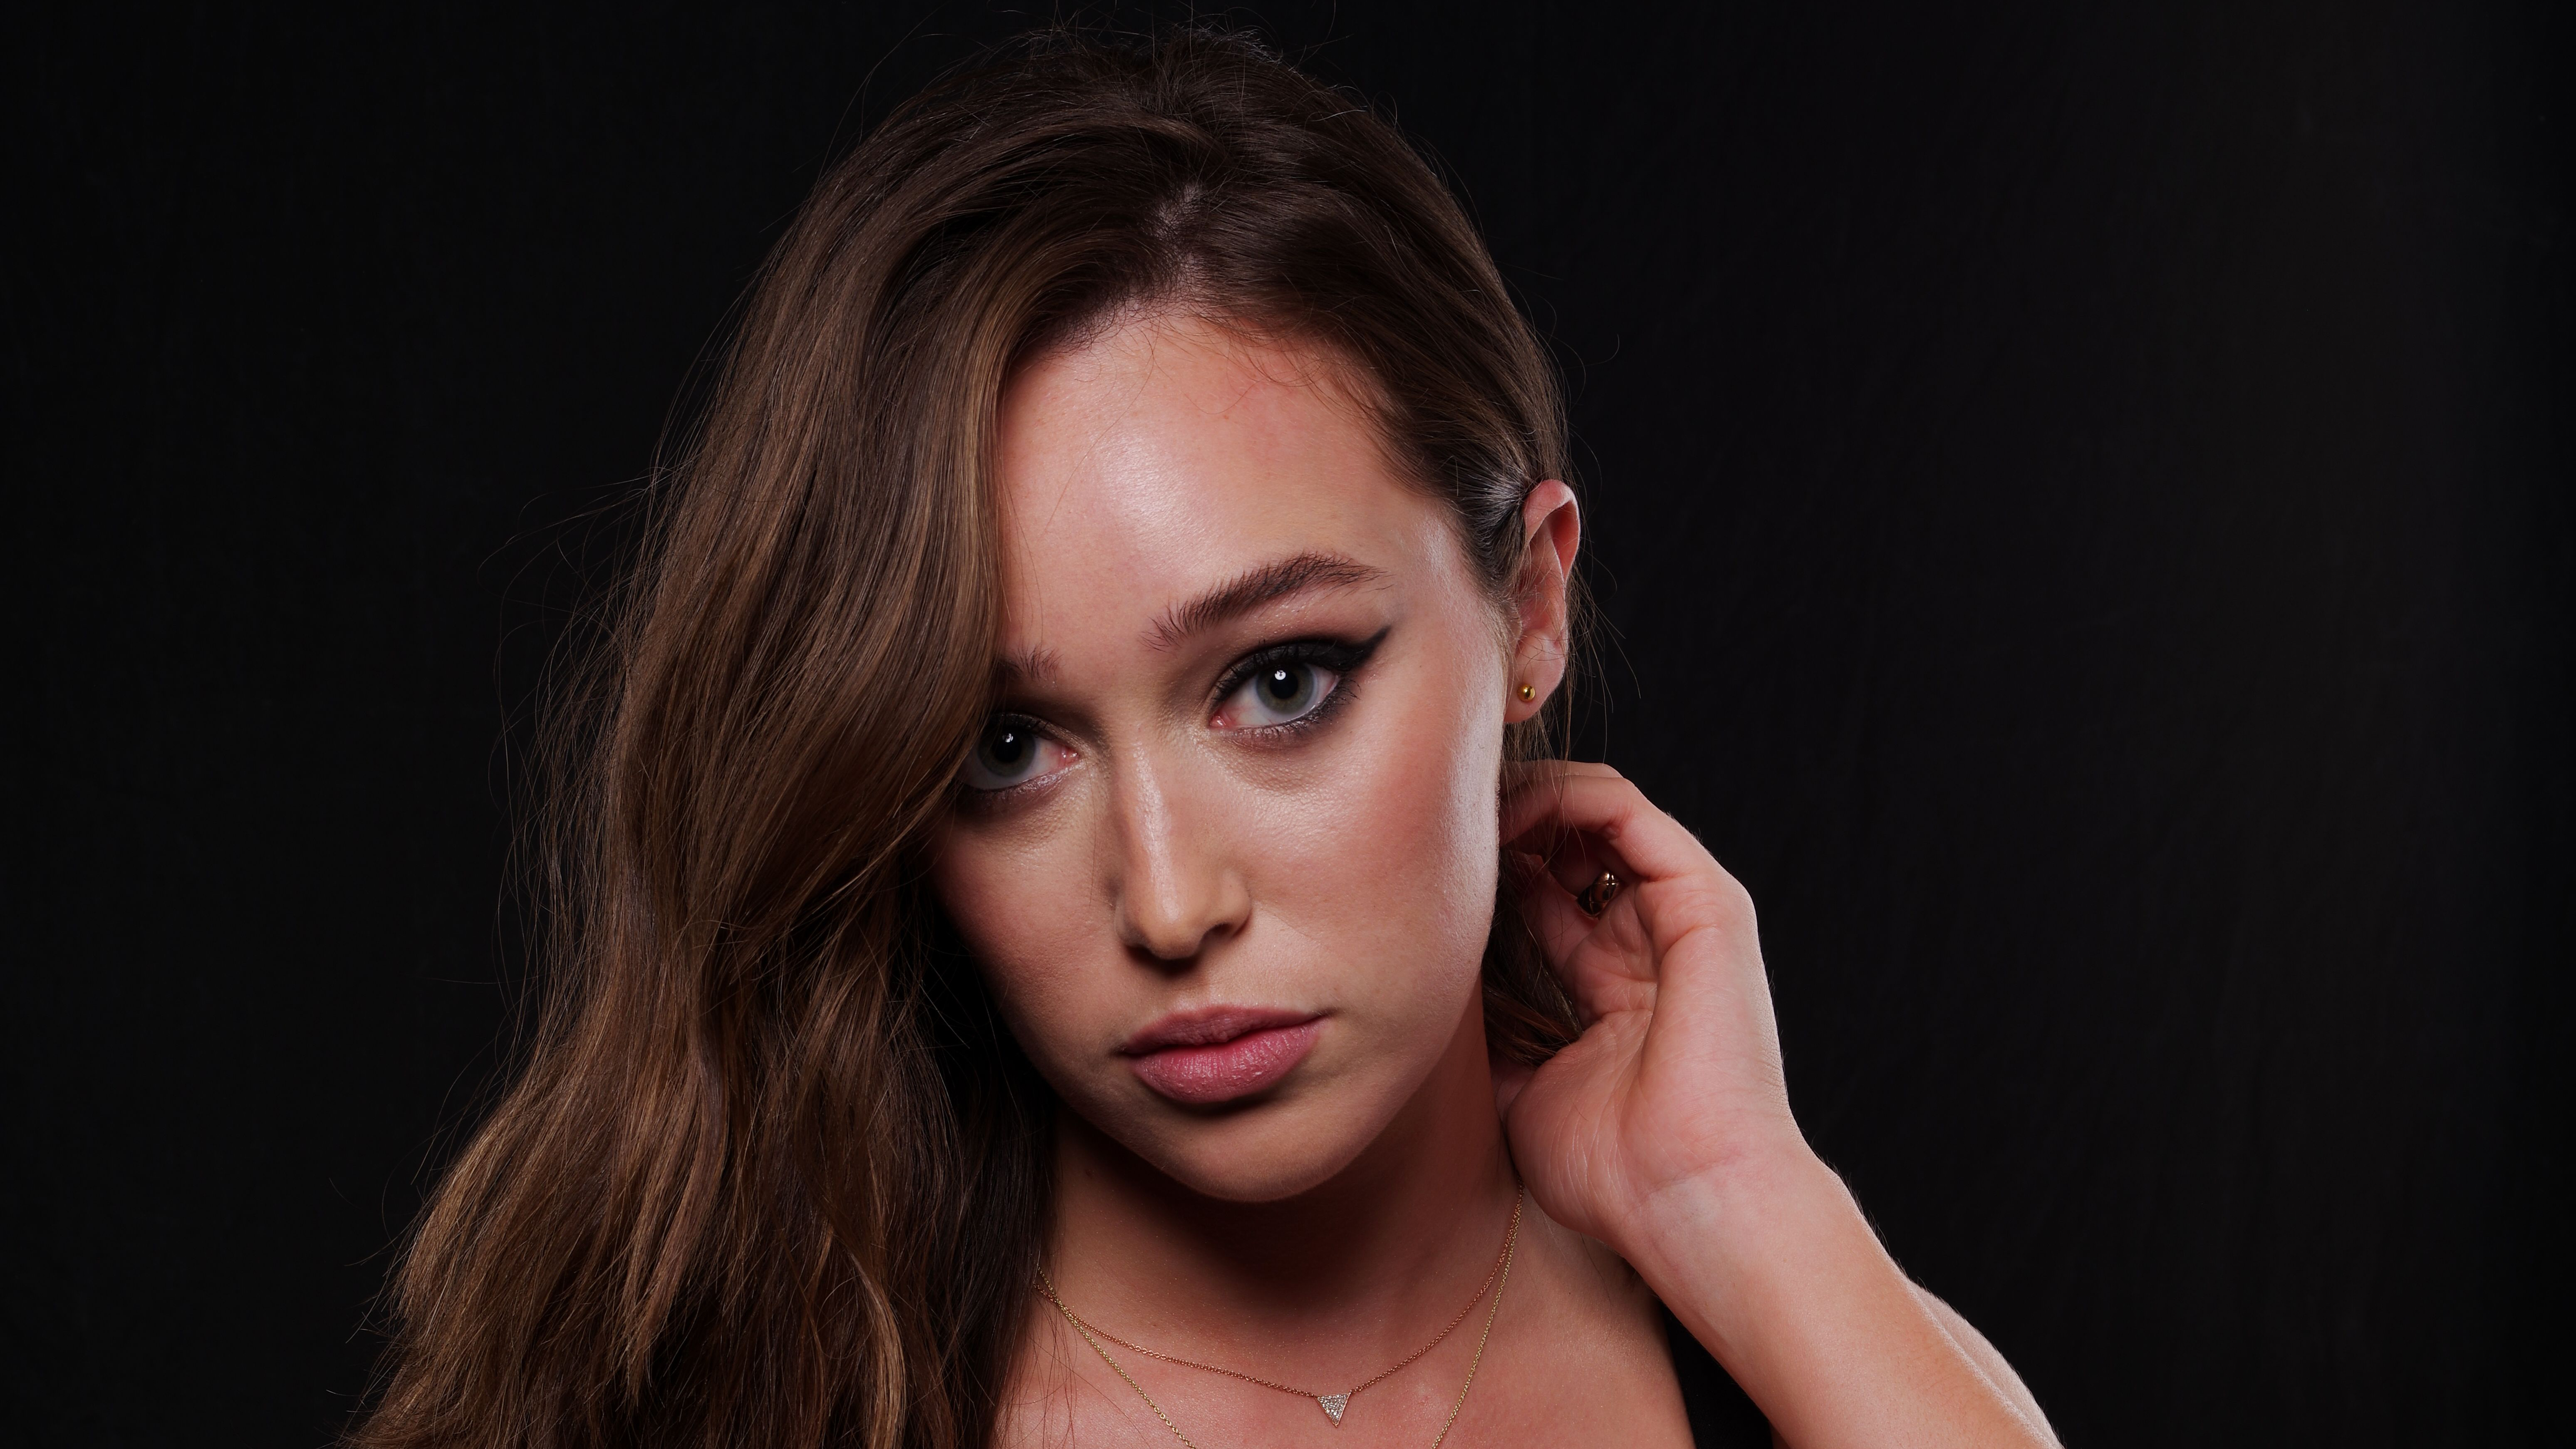 1920x1080 Alycia Debnam Carey 2019 Laptop Full Hd 1080p Hd 4k Wallpapers Images Backgrounds 